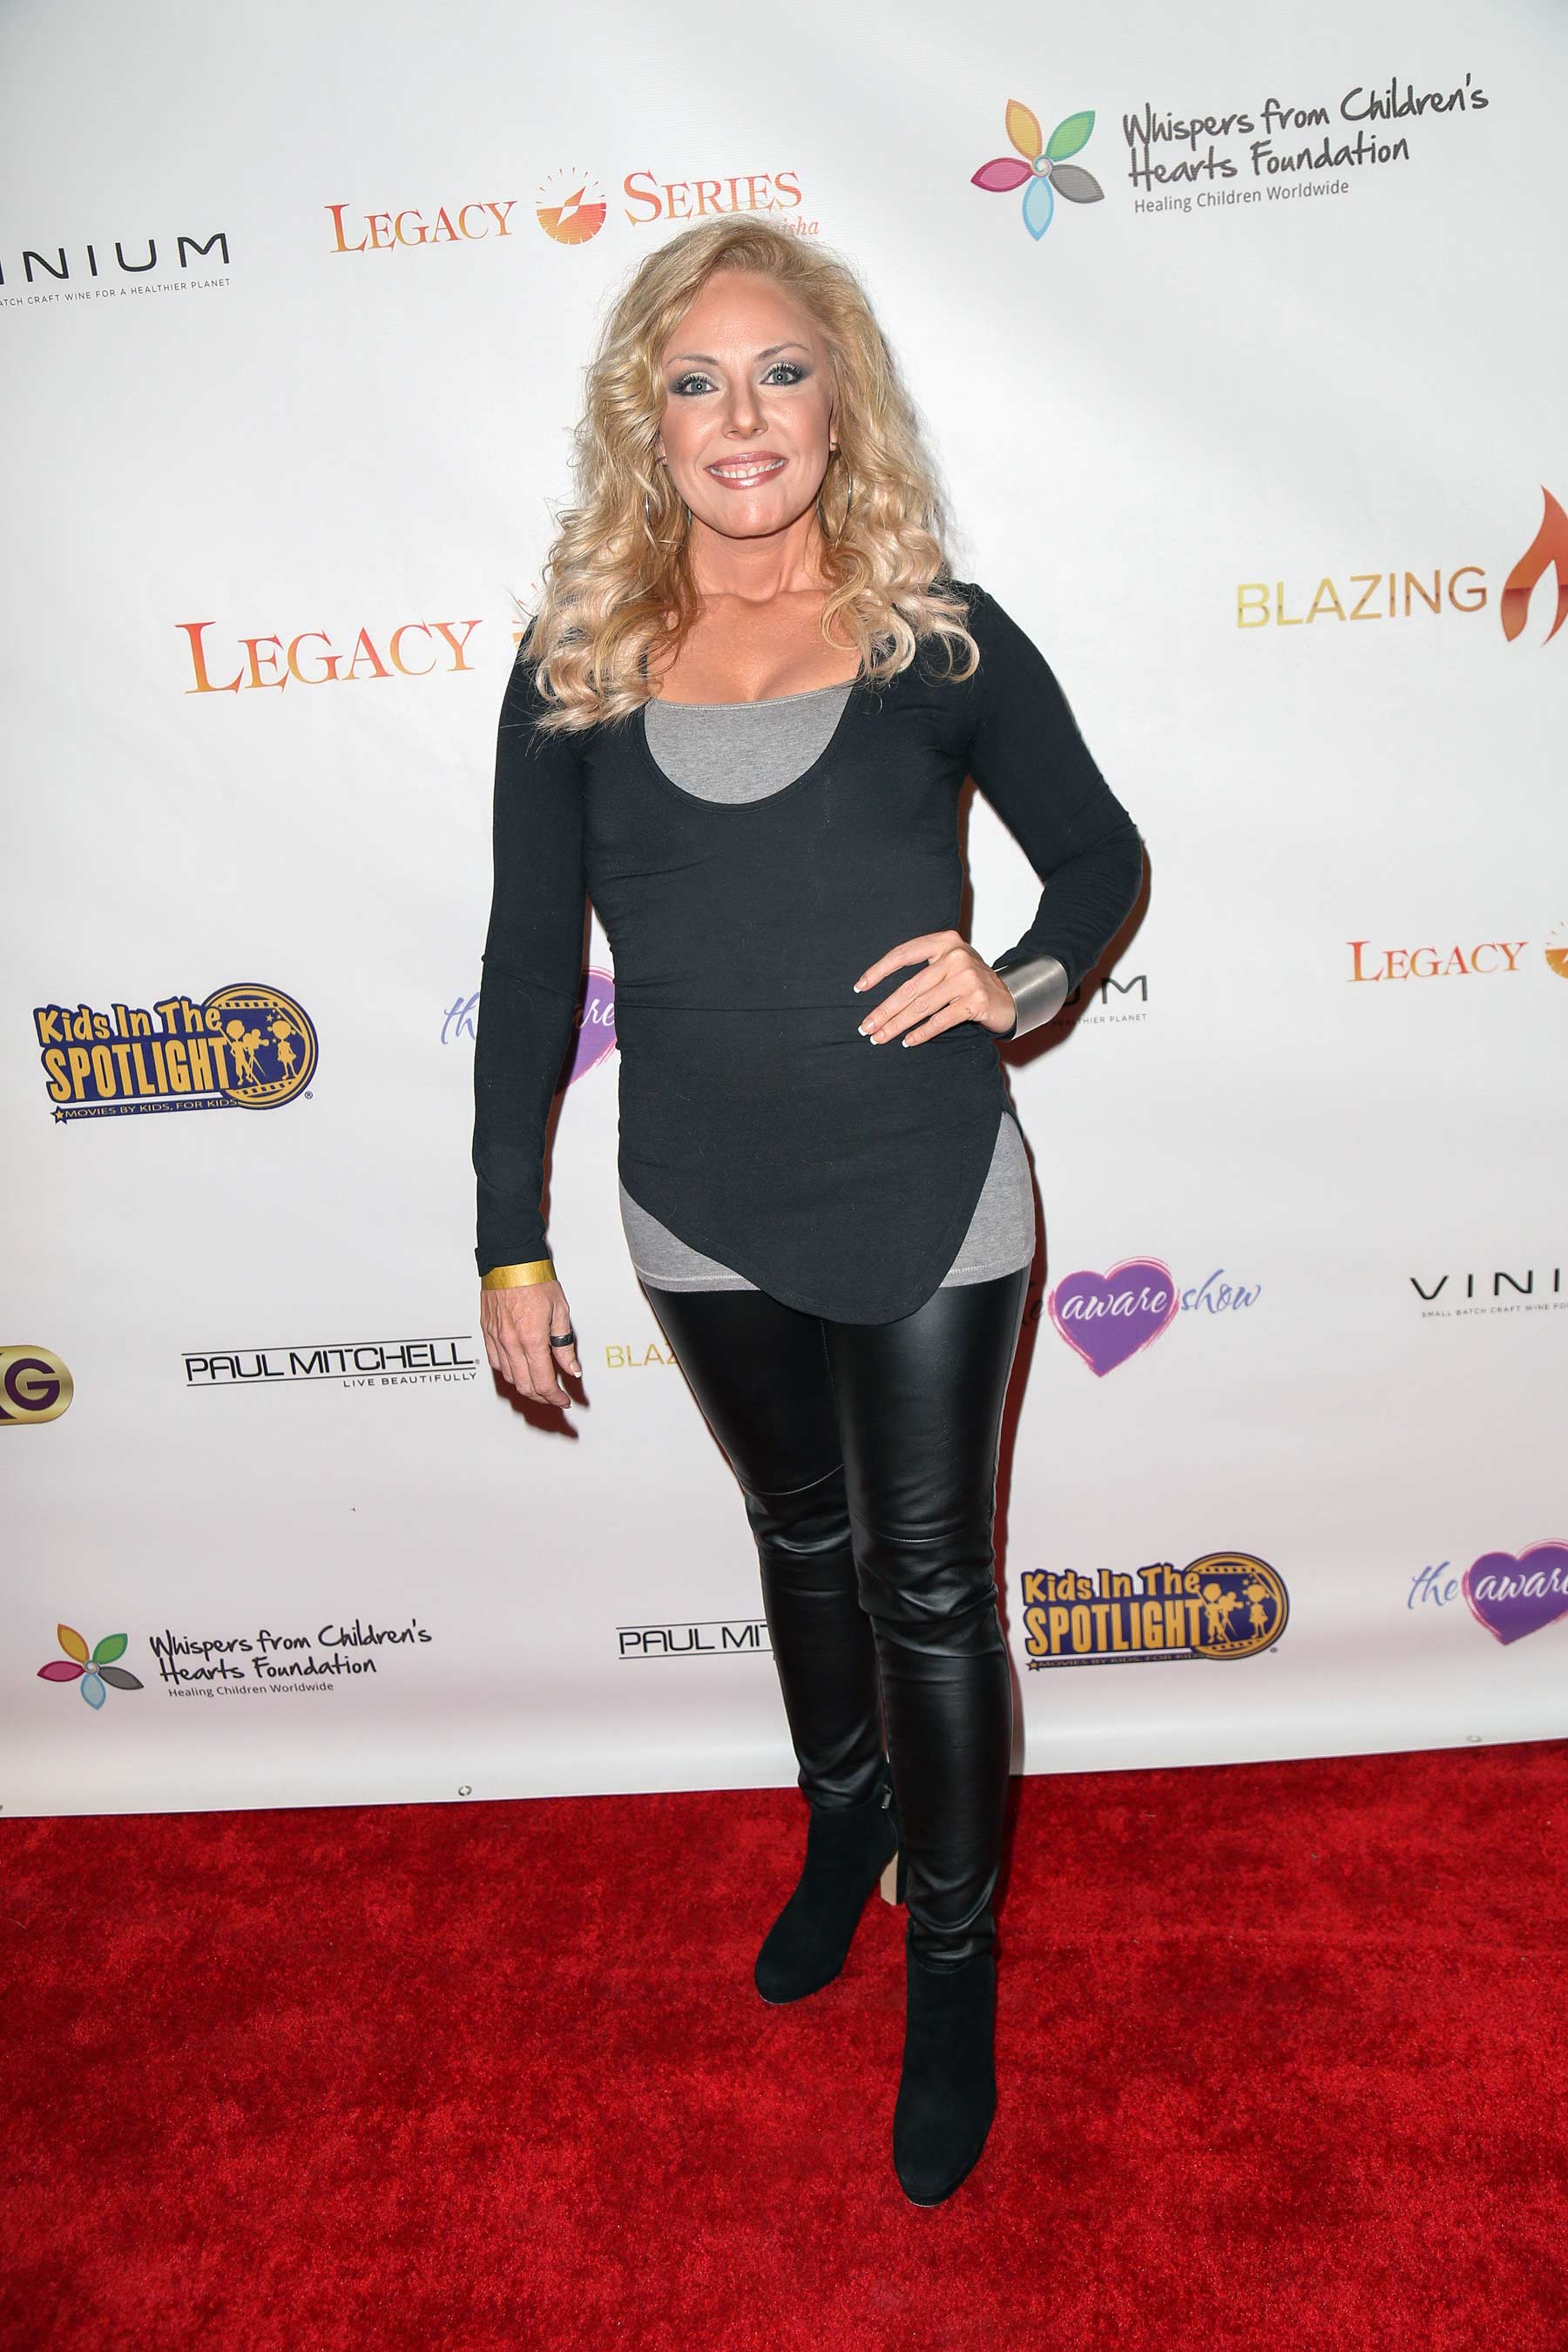 Stephanie Schuh attends 2nd Annual Legacy Series Charity Gala